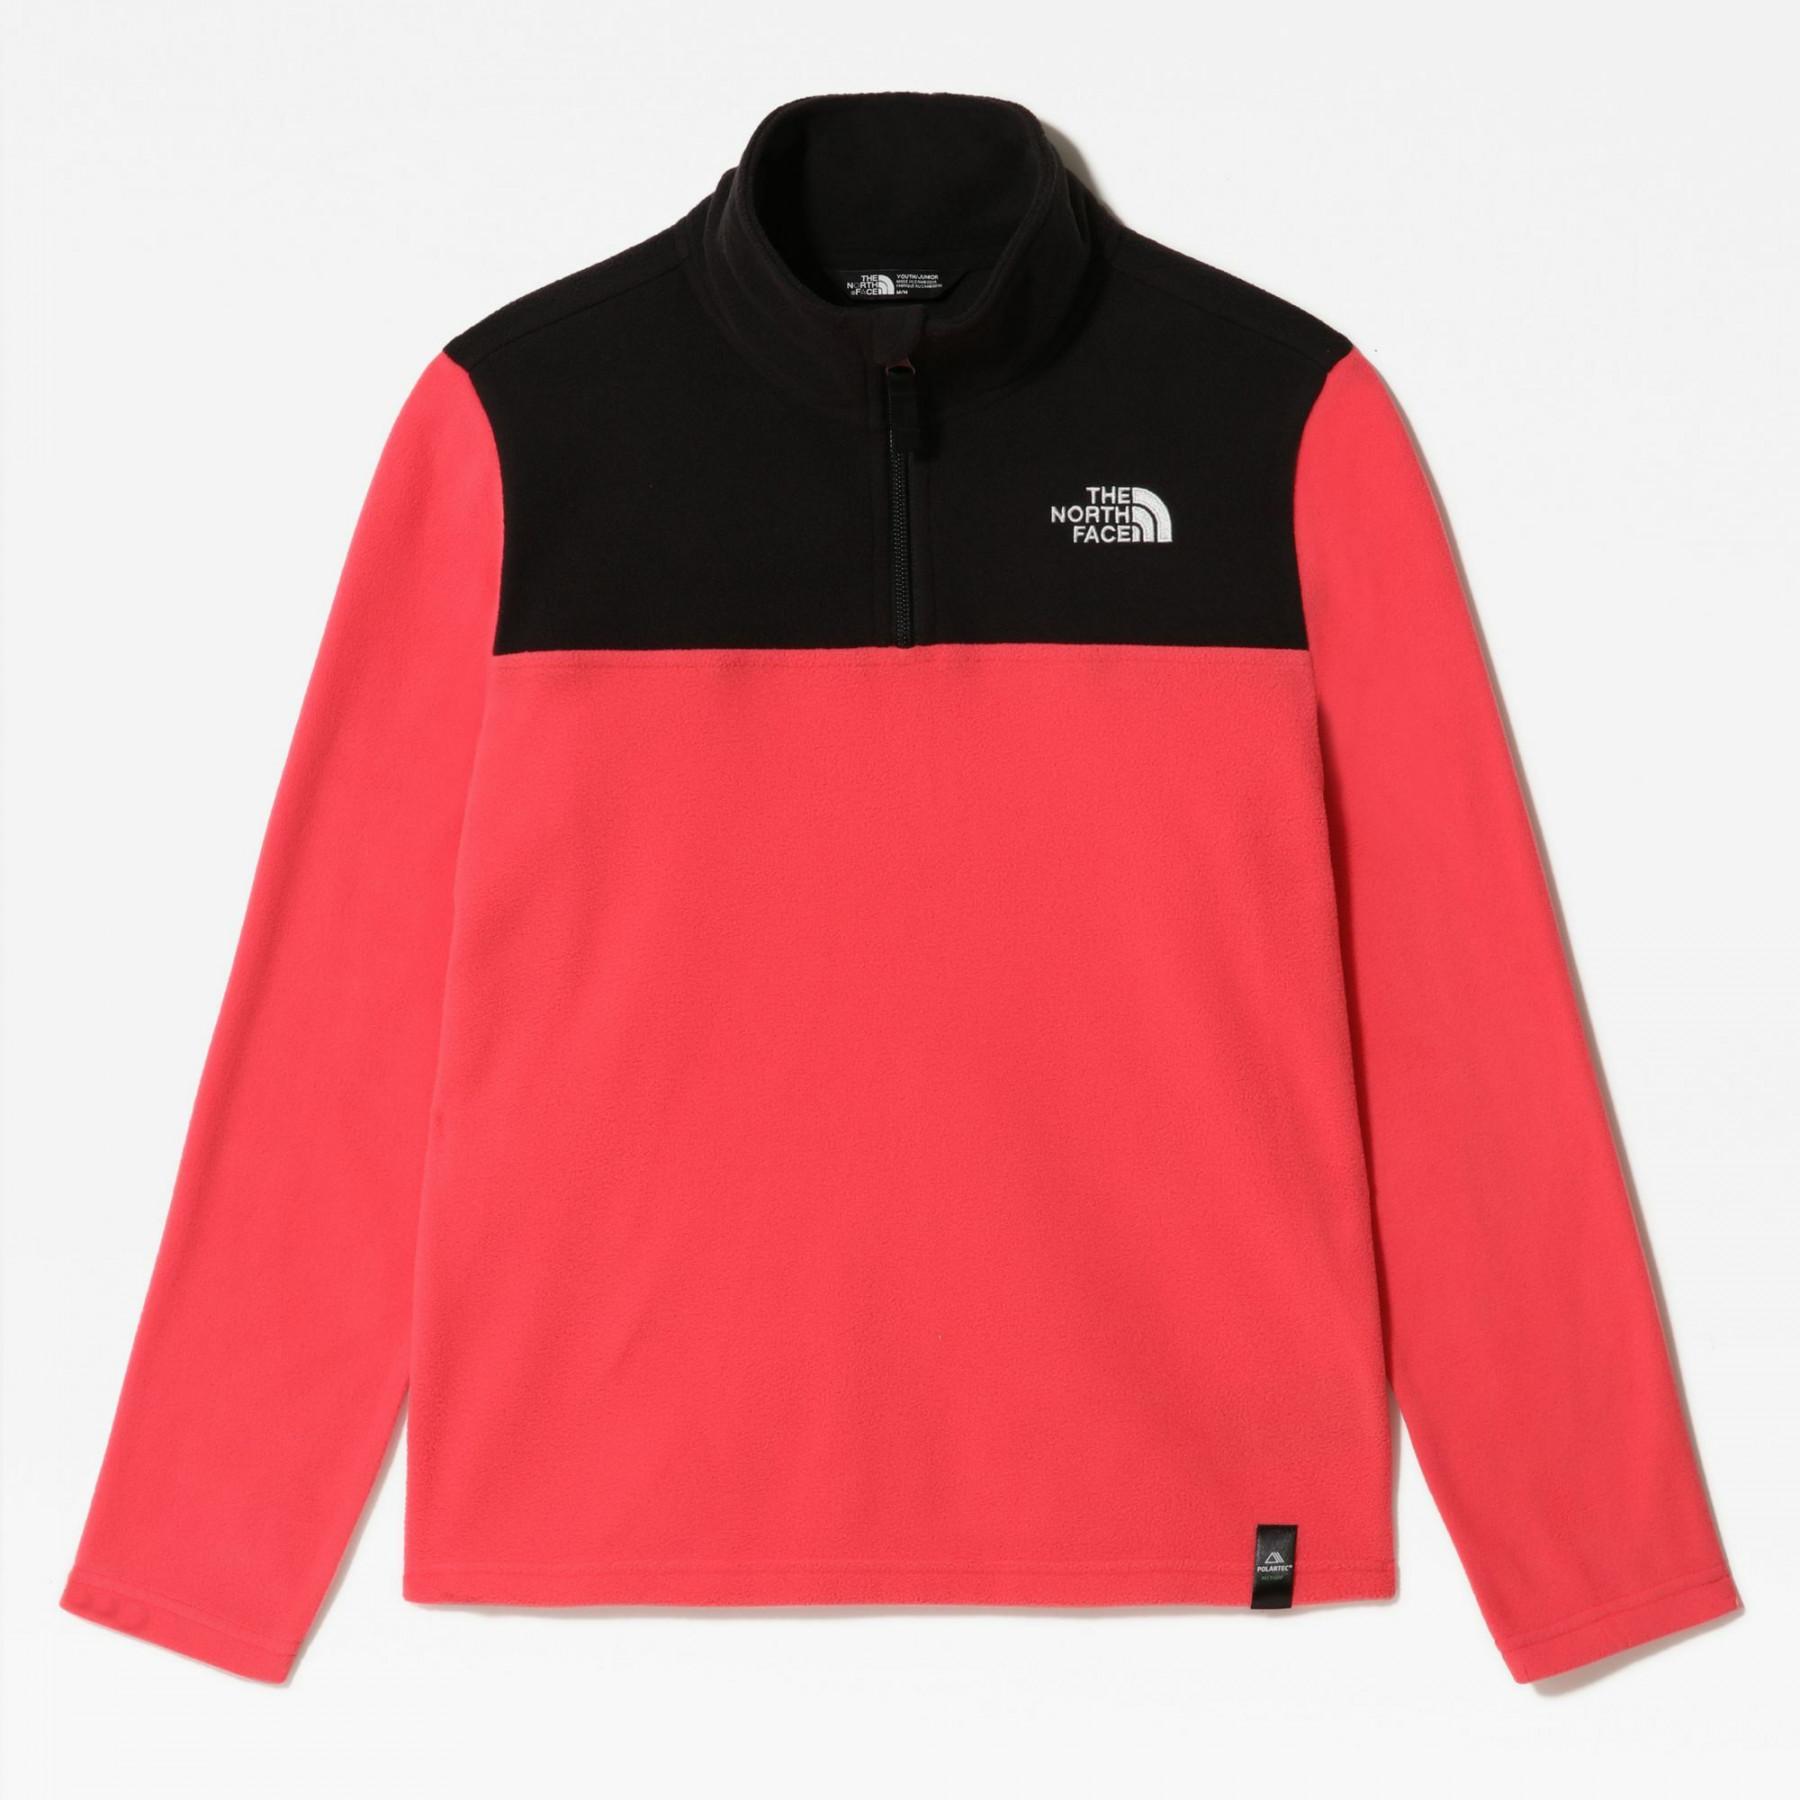 Giacca in pile per bambini The North Face Col